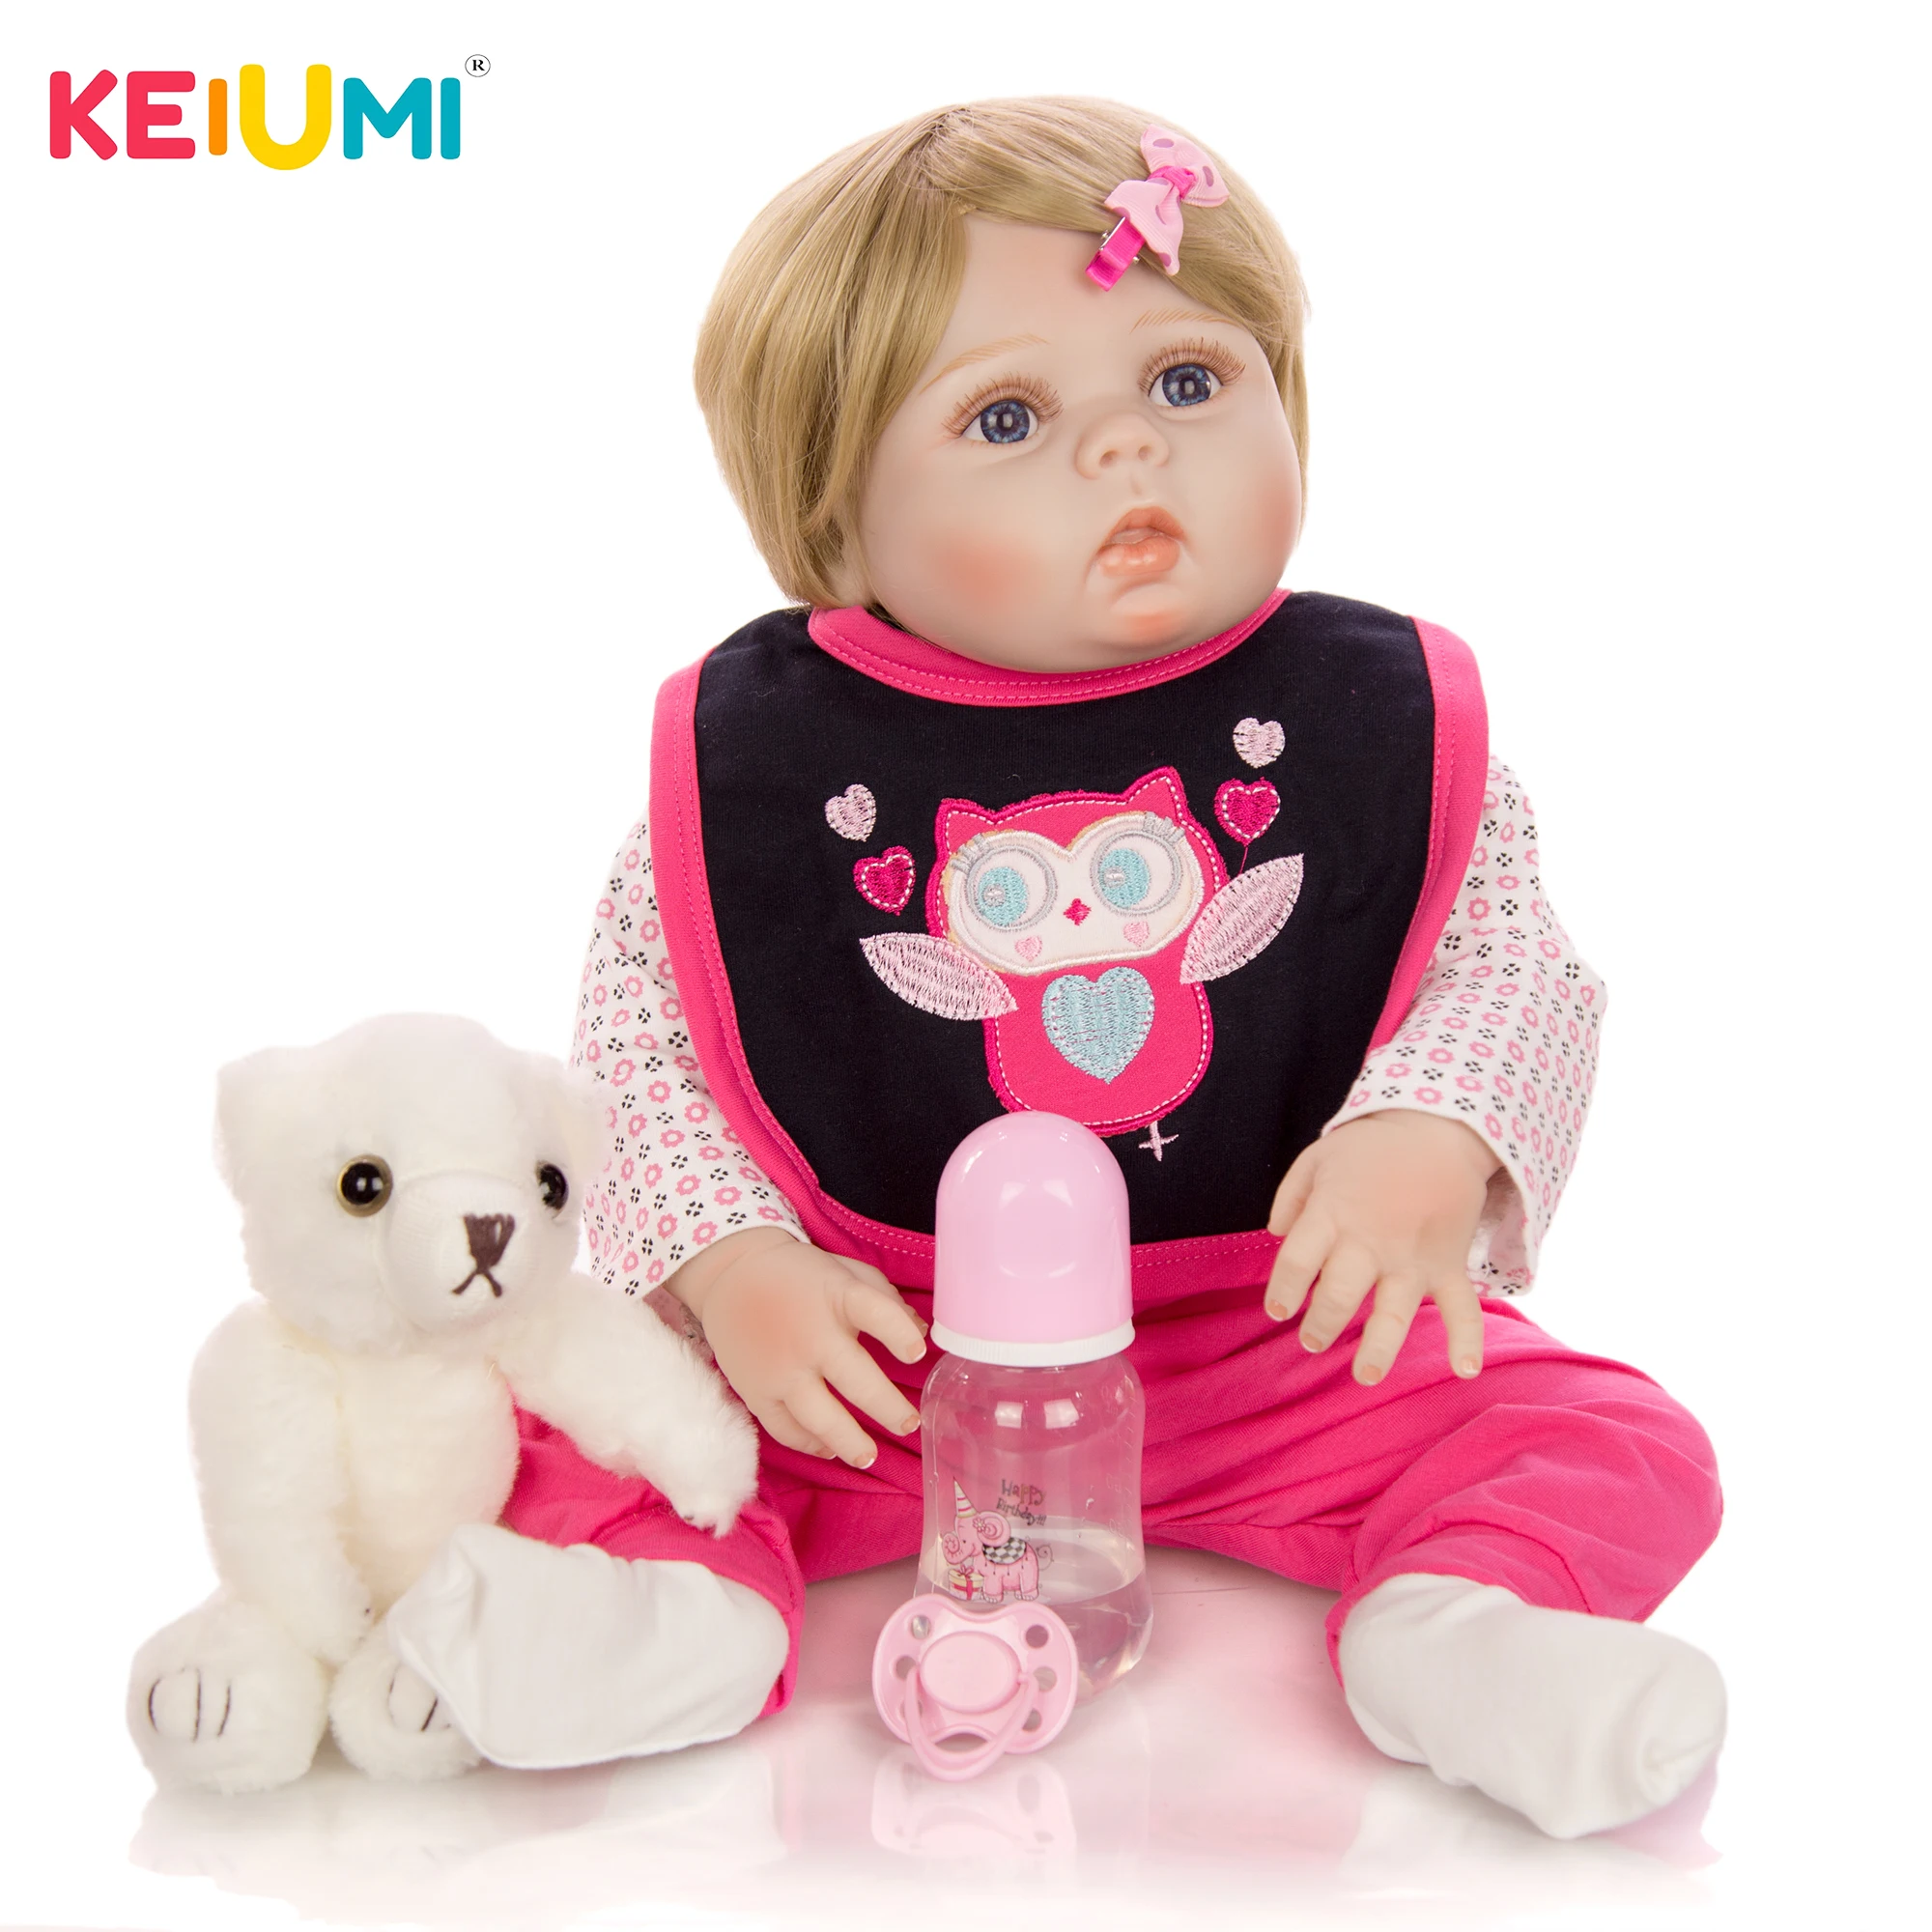 

KEIUMI Real 23 Inch 57cm Reborn Baby Doll Full Silicone Adorable Lifelike Toddler Kids Menina With Surprise For Christmas Gift